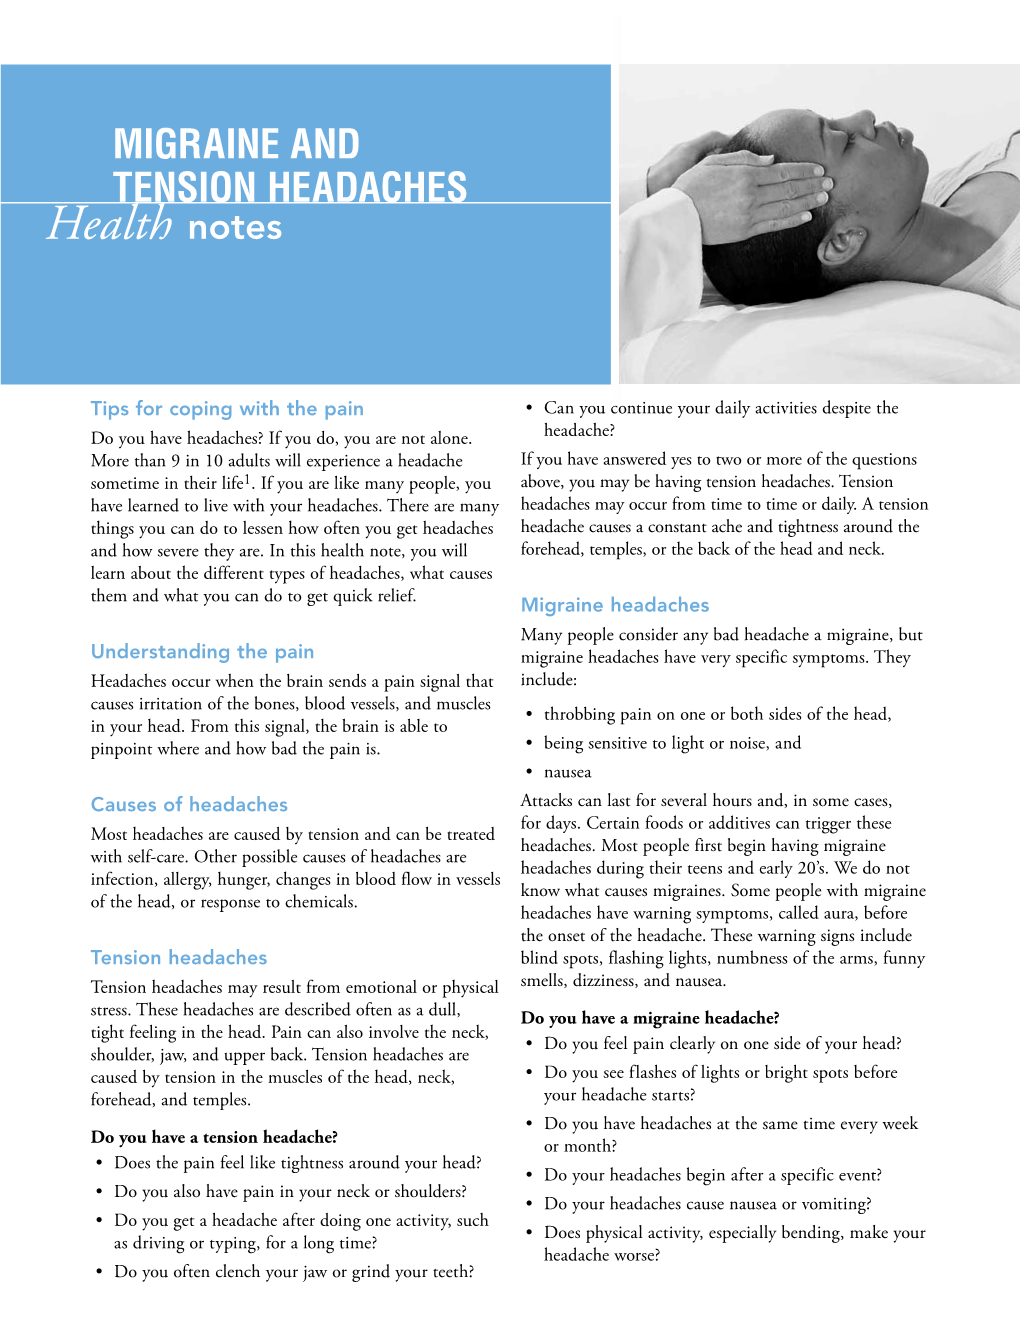 Migraine and Tension Headaches Health Notes